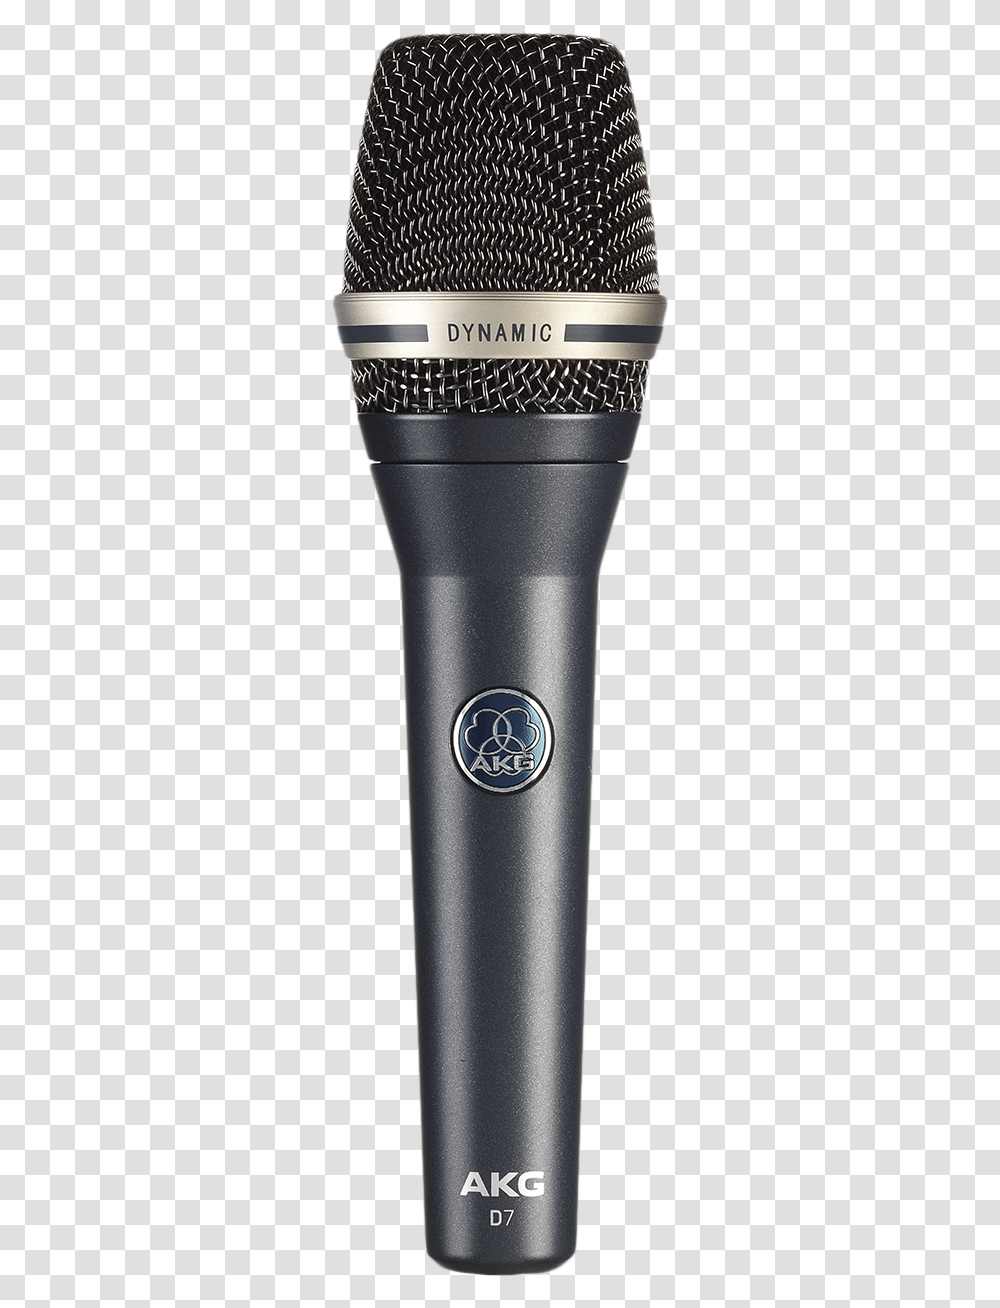 Akg, Microphone, Electrical Device, Shaker, Bottle Transparent Png